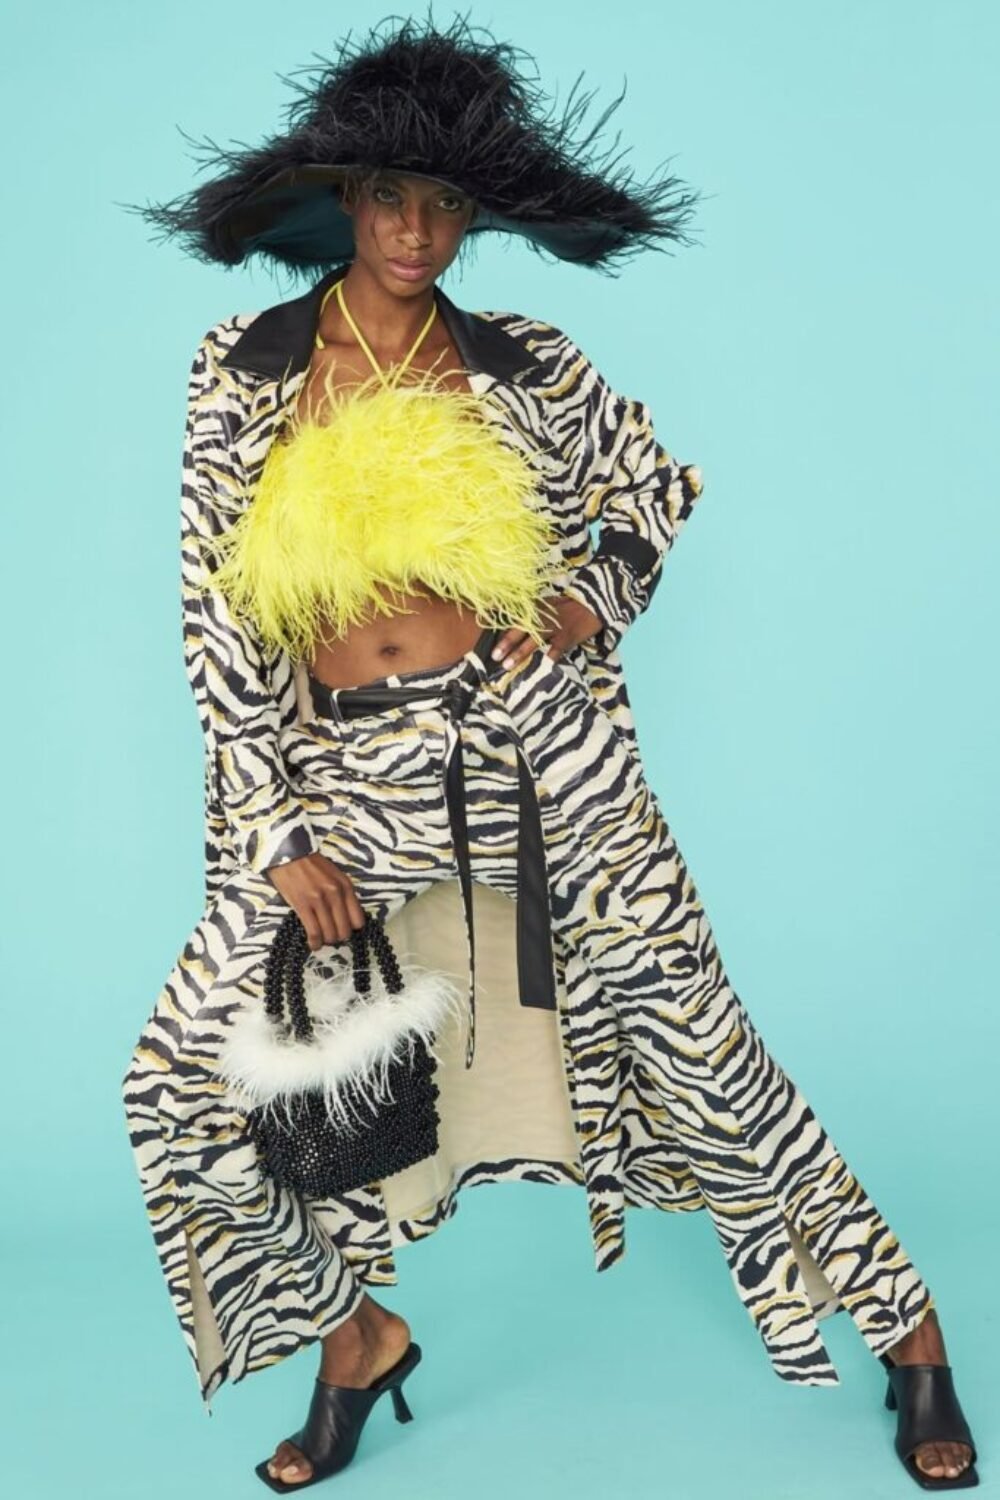 Shop Lux Faux Suede Zebra Print Trench Coat and women's luxury and designer clothes at www.lux-apparel.co.uk